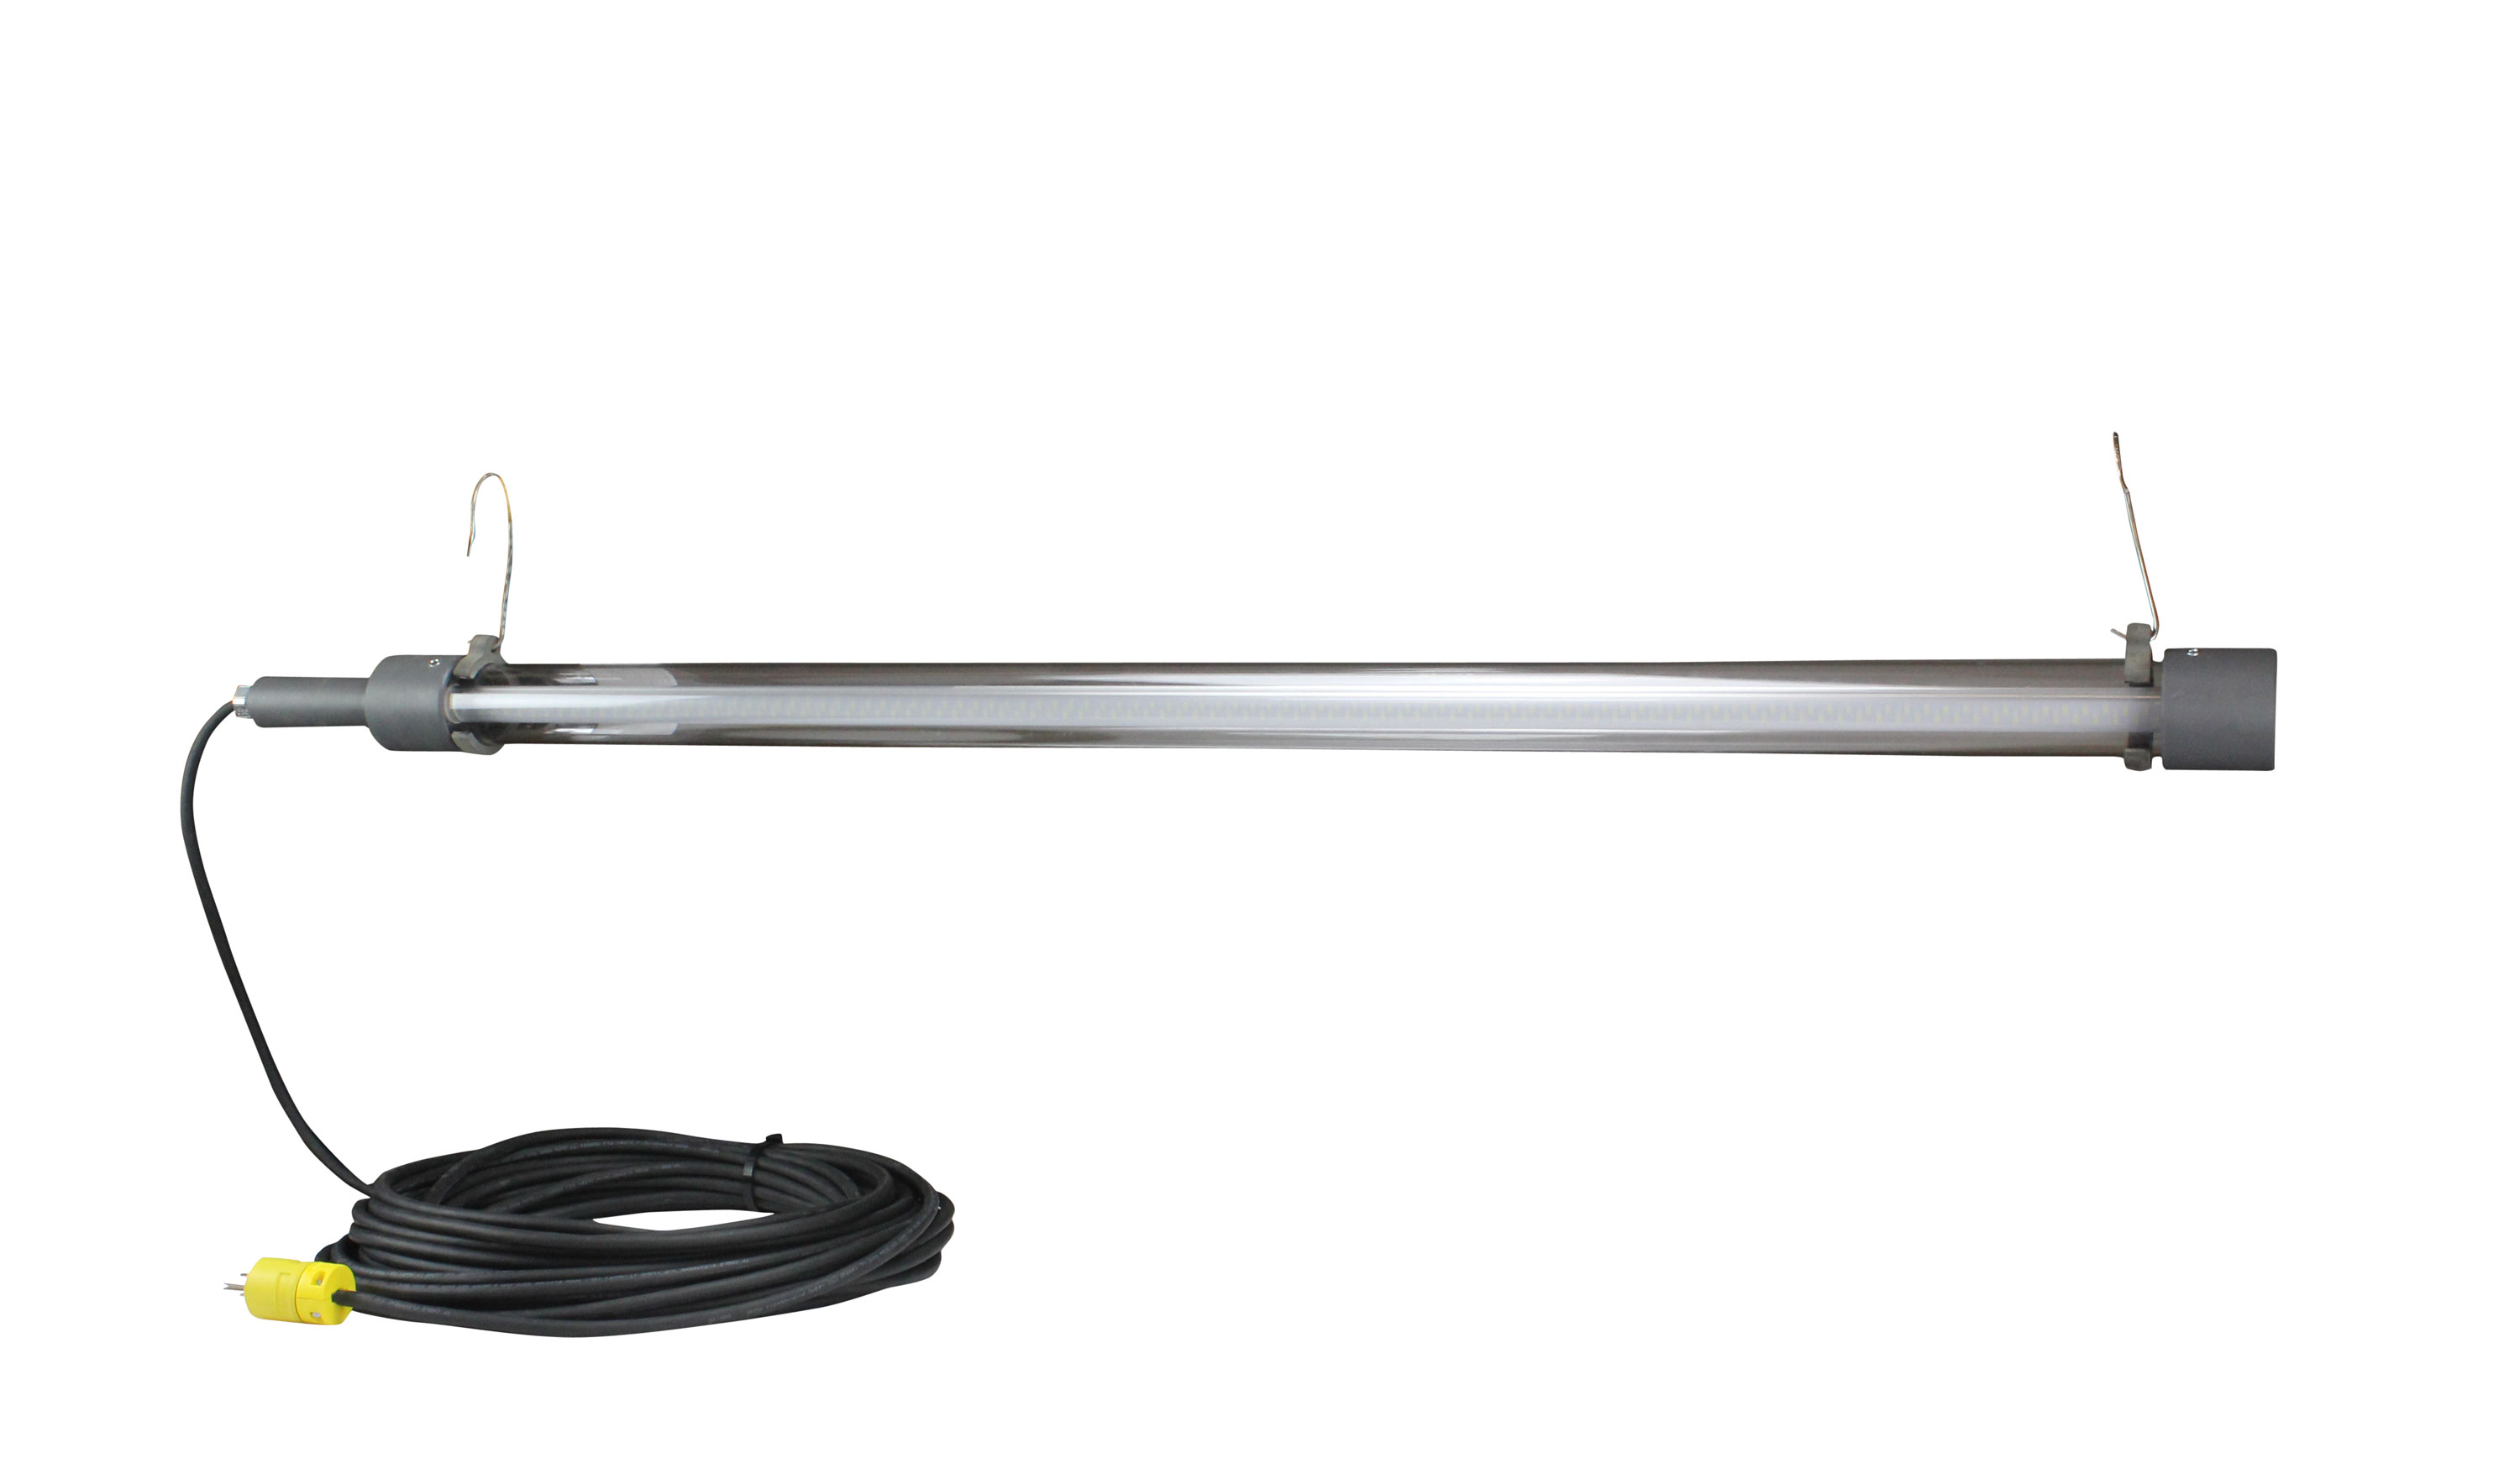 Five Foot LED Task Light ideal for maintenance, construction and aircraft interiors